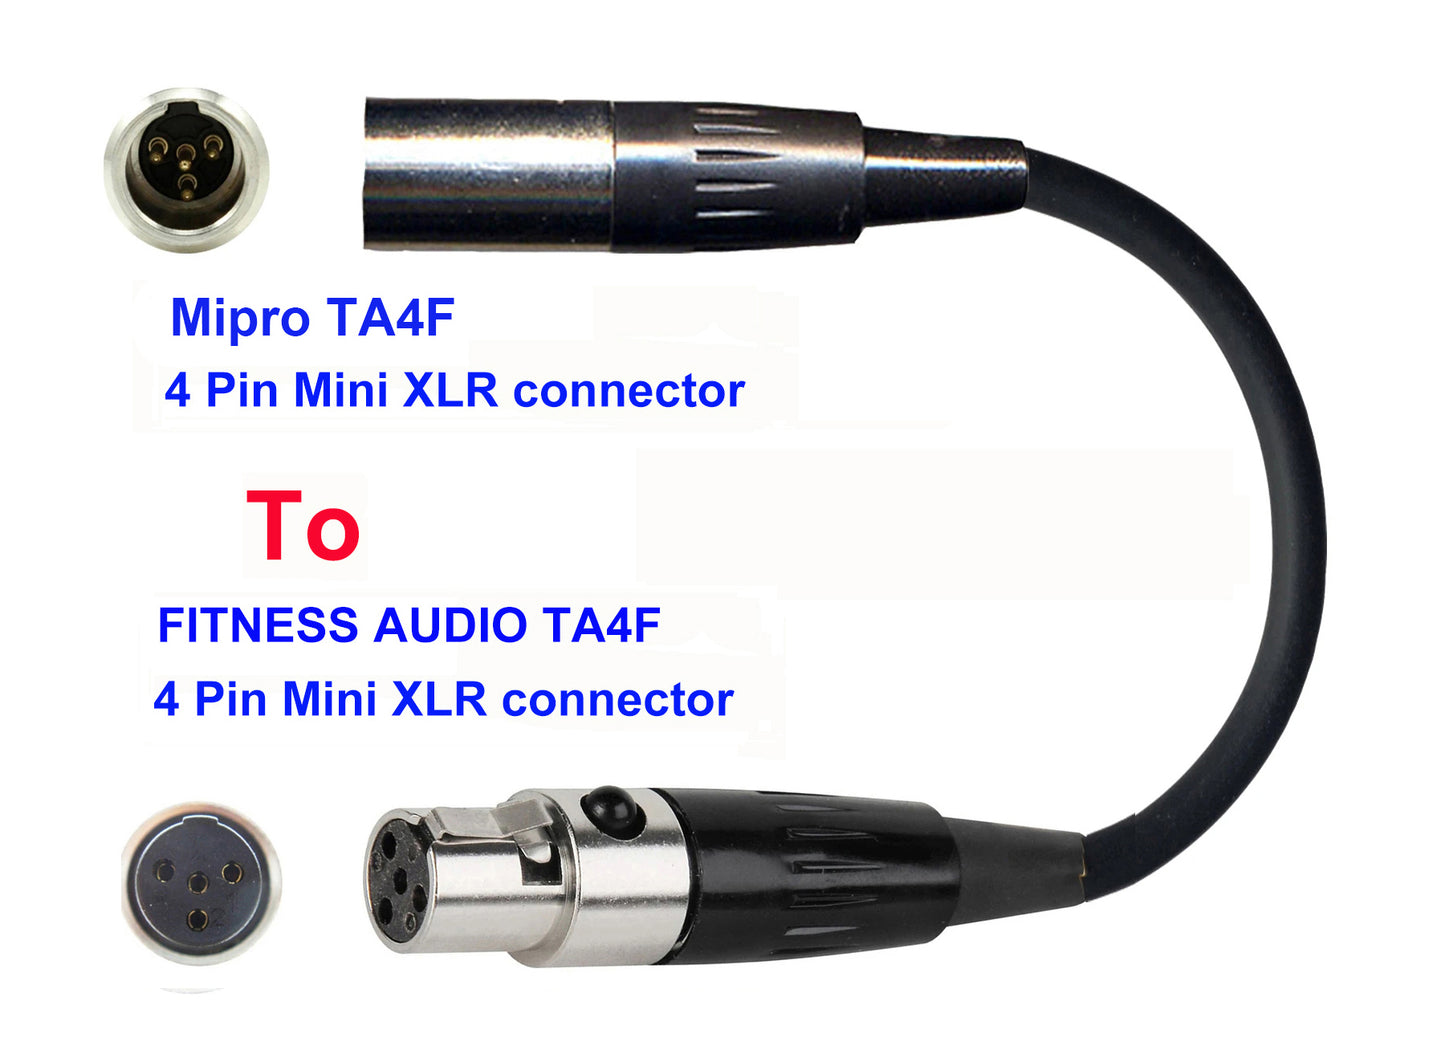 Microphone Adapter - Mipro Microphones with TA4F 4 pin mini XLR Locking connector TO Fitness Audio Transmitters with 4pin TA4M connector